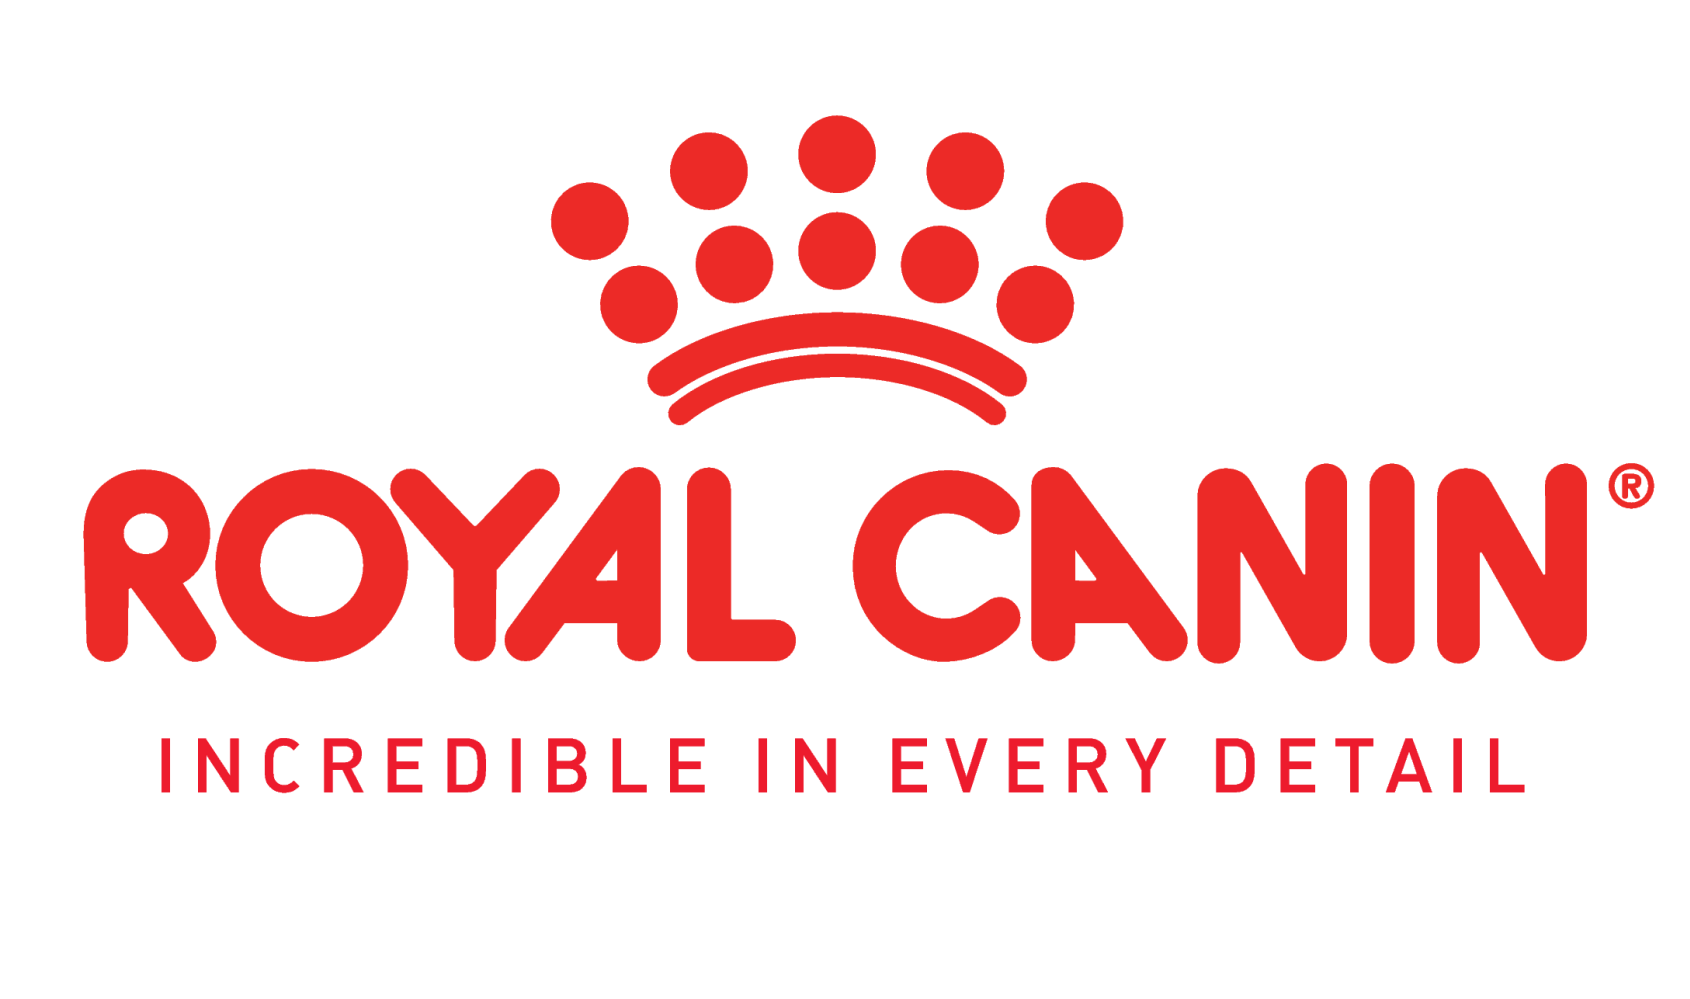 Royal canin logo, the words Royal Canin with a red crown on top